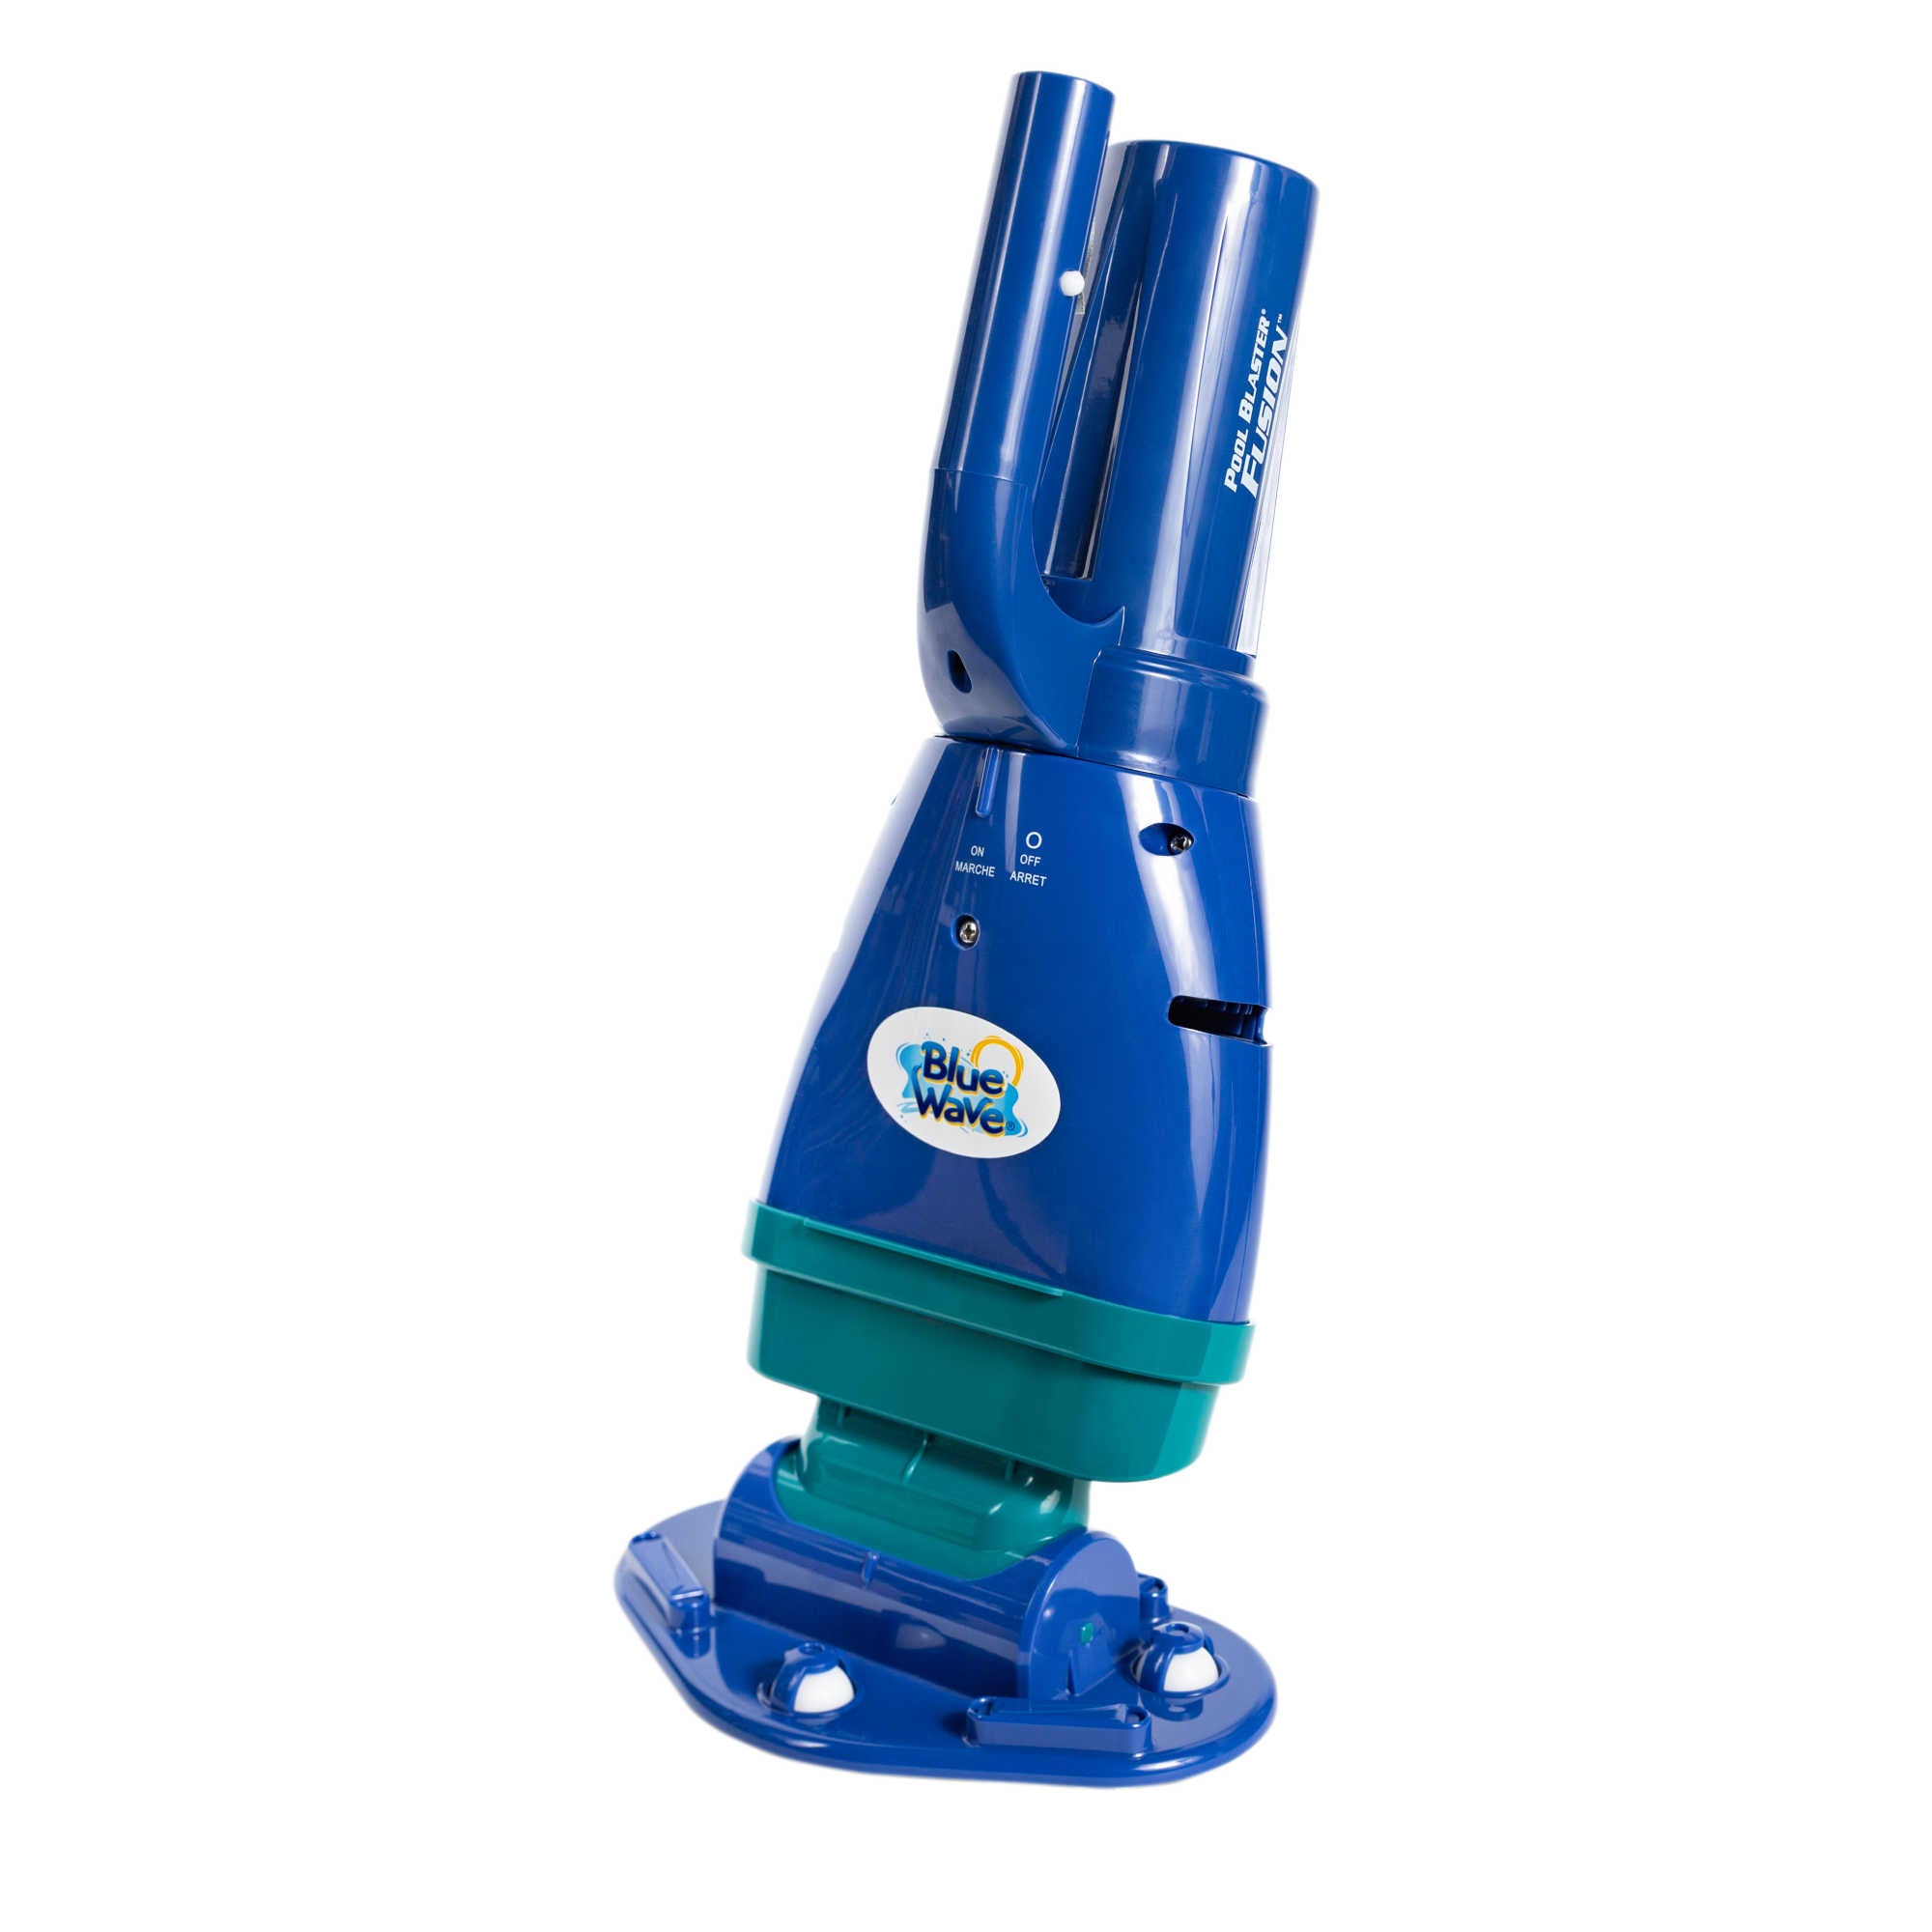 Blue Wave Bluewave Pool Blaster Fusion PV-5 Hand-Held Cleaner Cordless